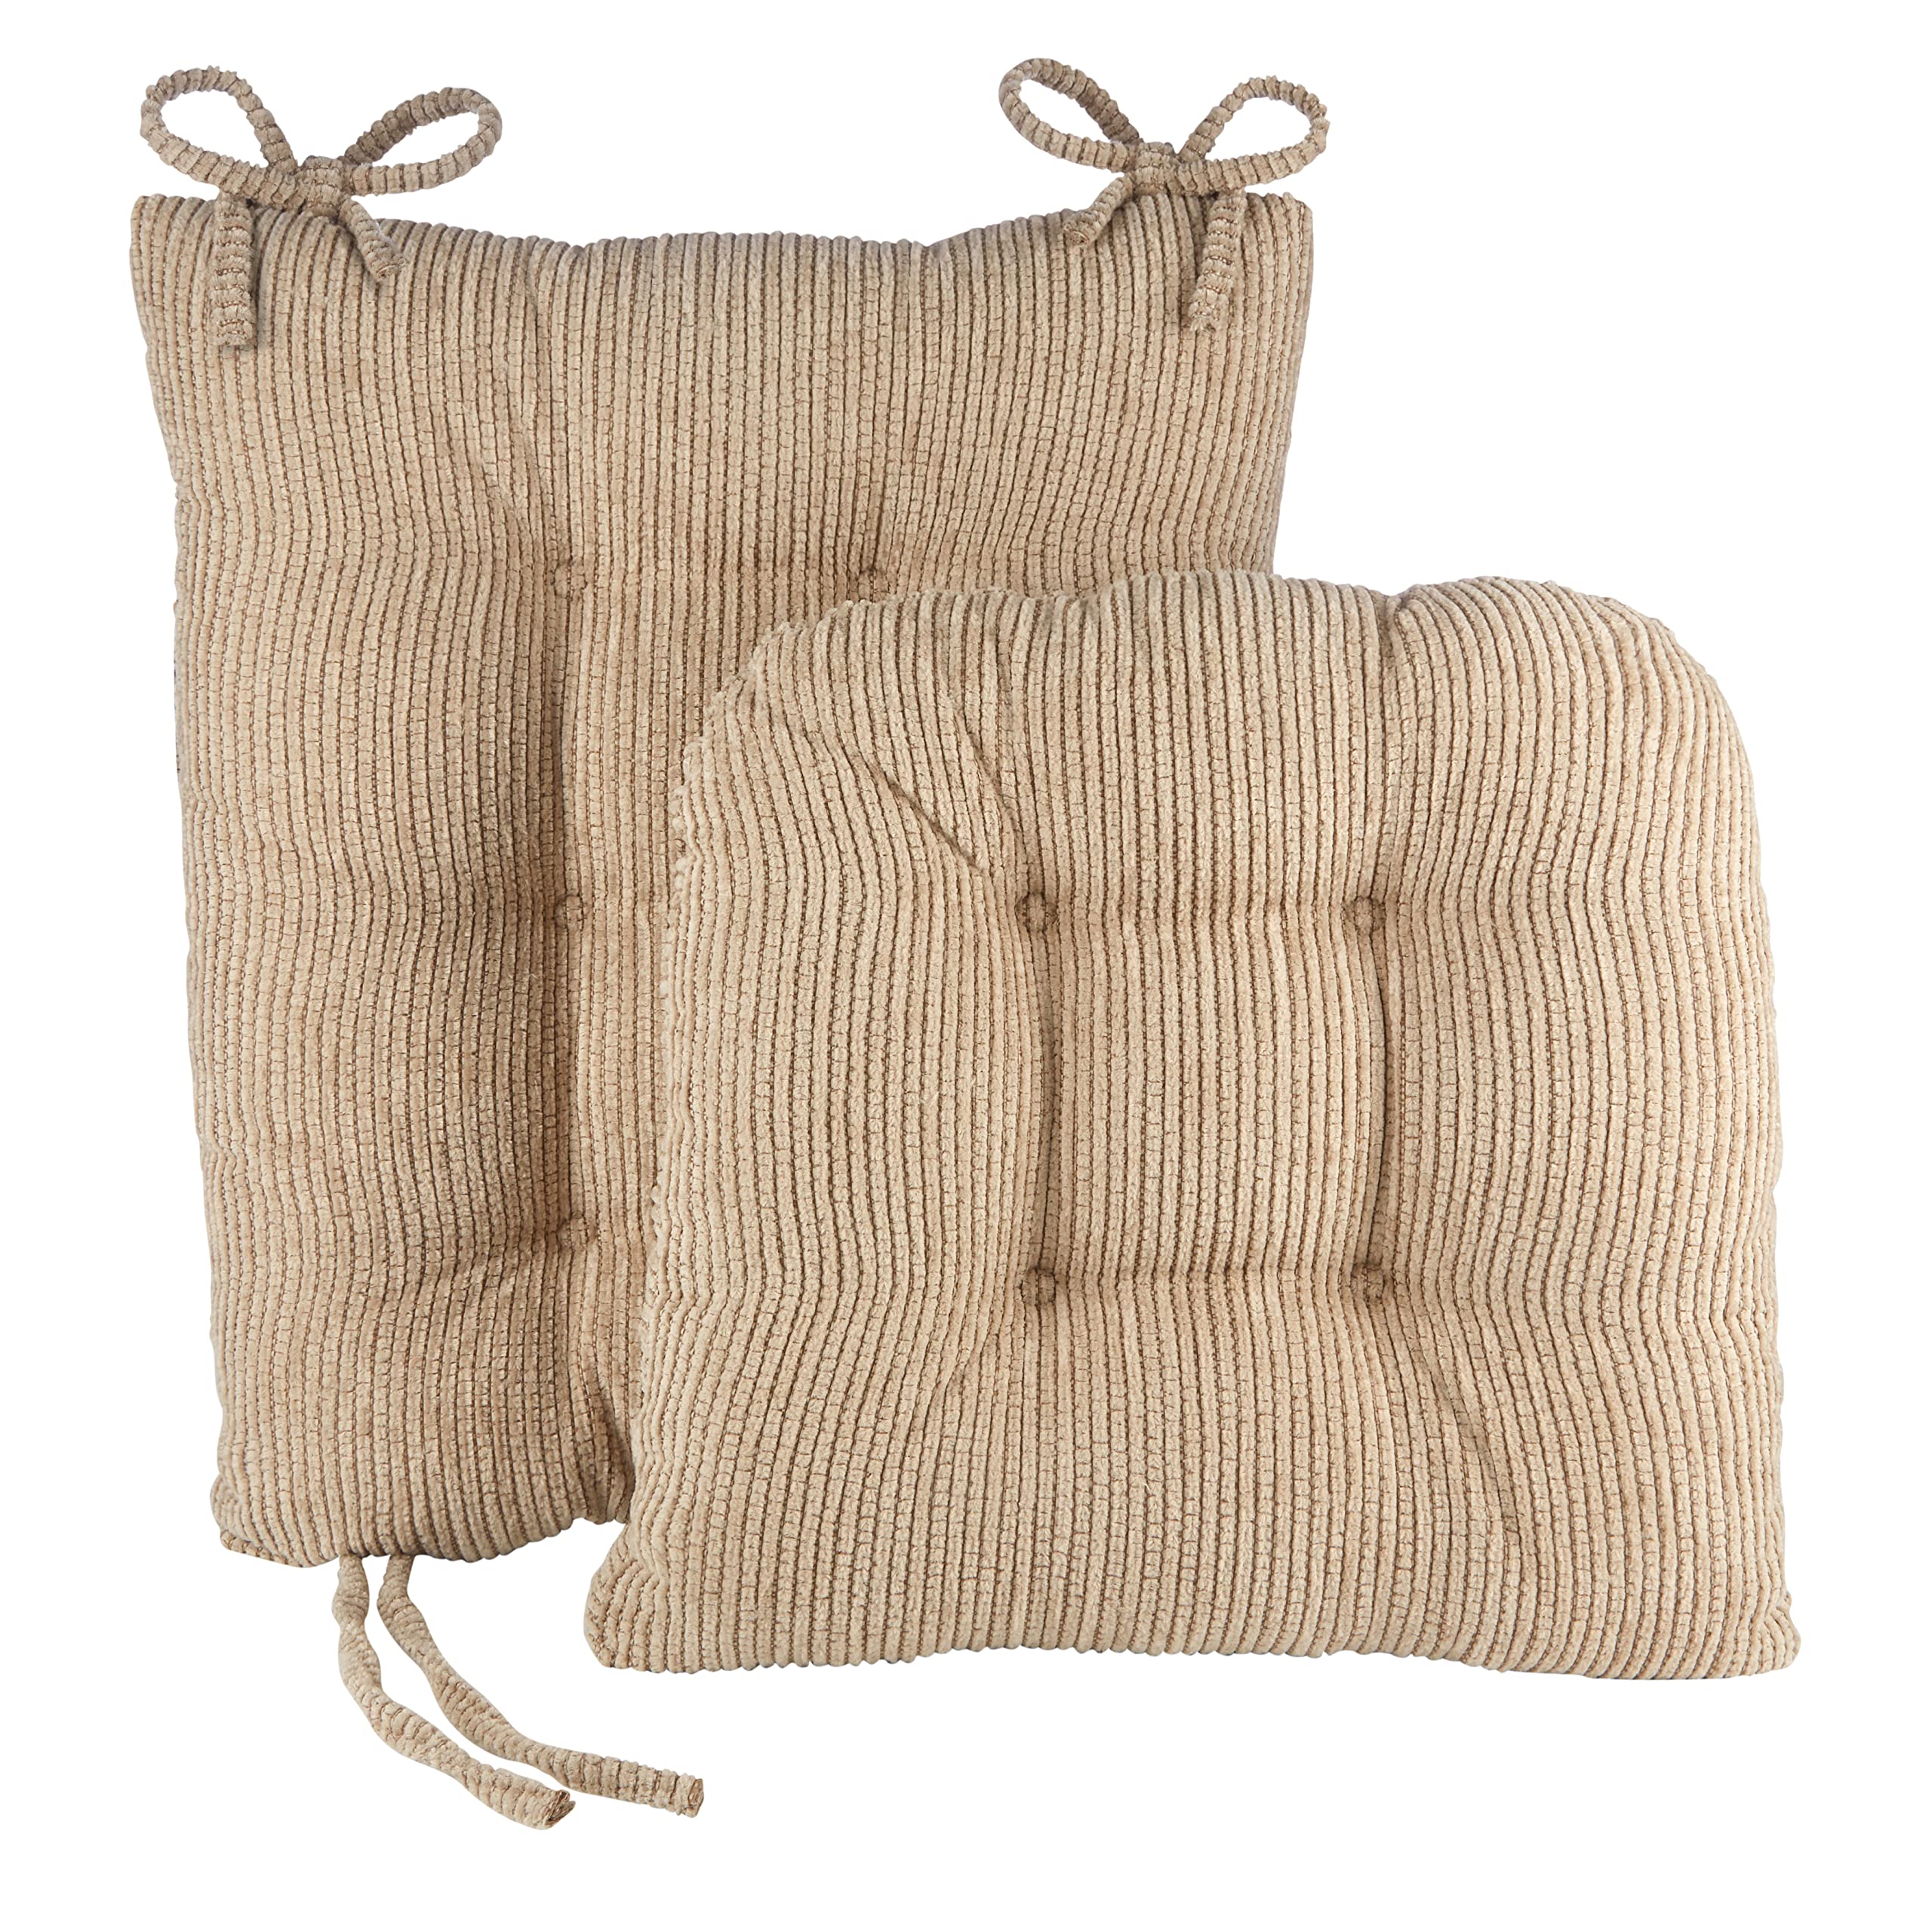 Klear Vu Omega Non-Slip Rocking Chair Cushion Set with Thick Padding and Tufted Design, Includes Seat Pad & Back Pillow with Tie